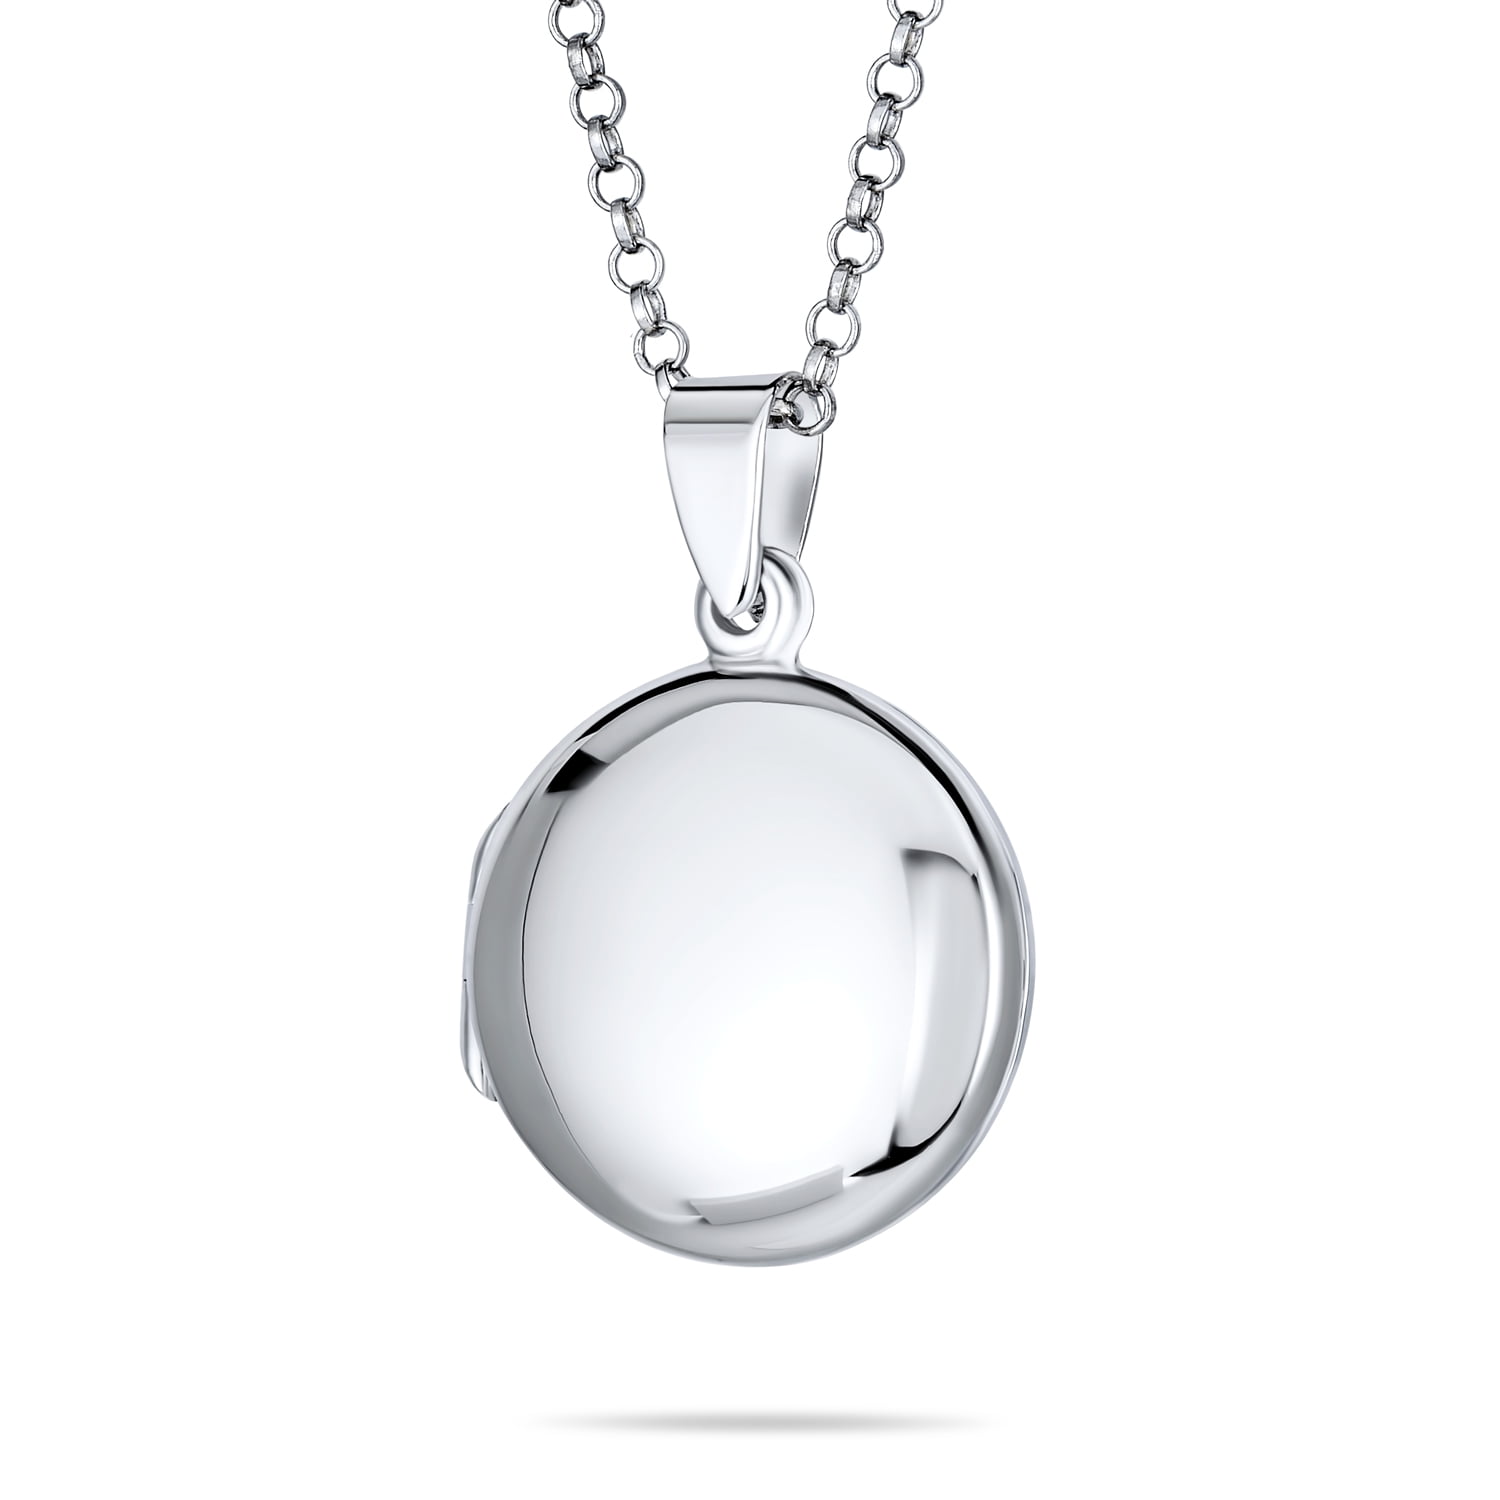 Power Wing Simple Cute Small Round Shaped Locket Necklace for Women Girl,Lockets Pendant That Holds Pictures Jewelry 